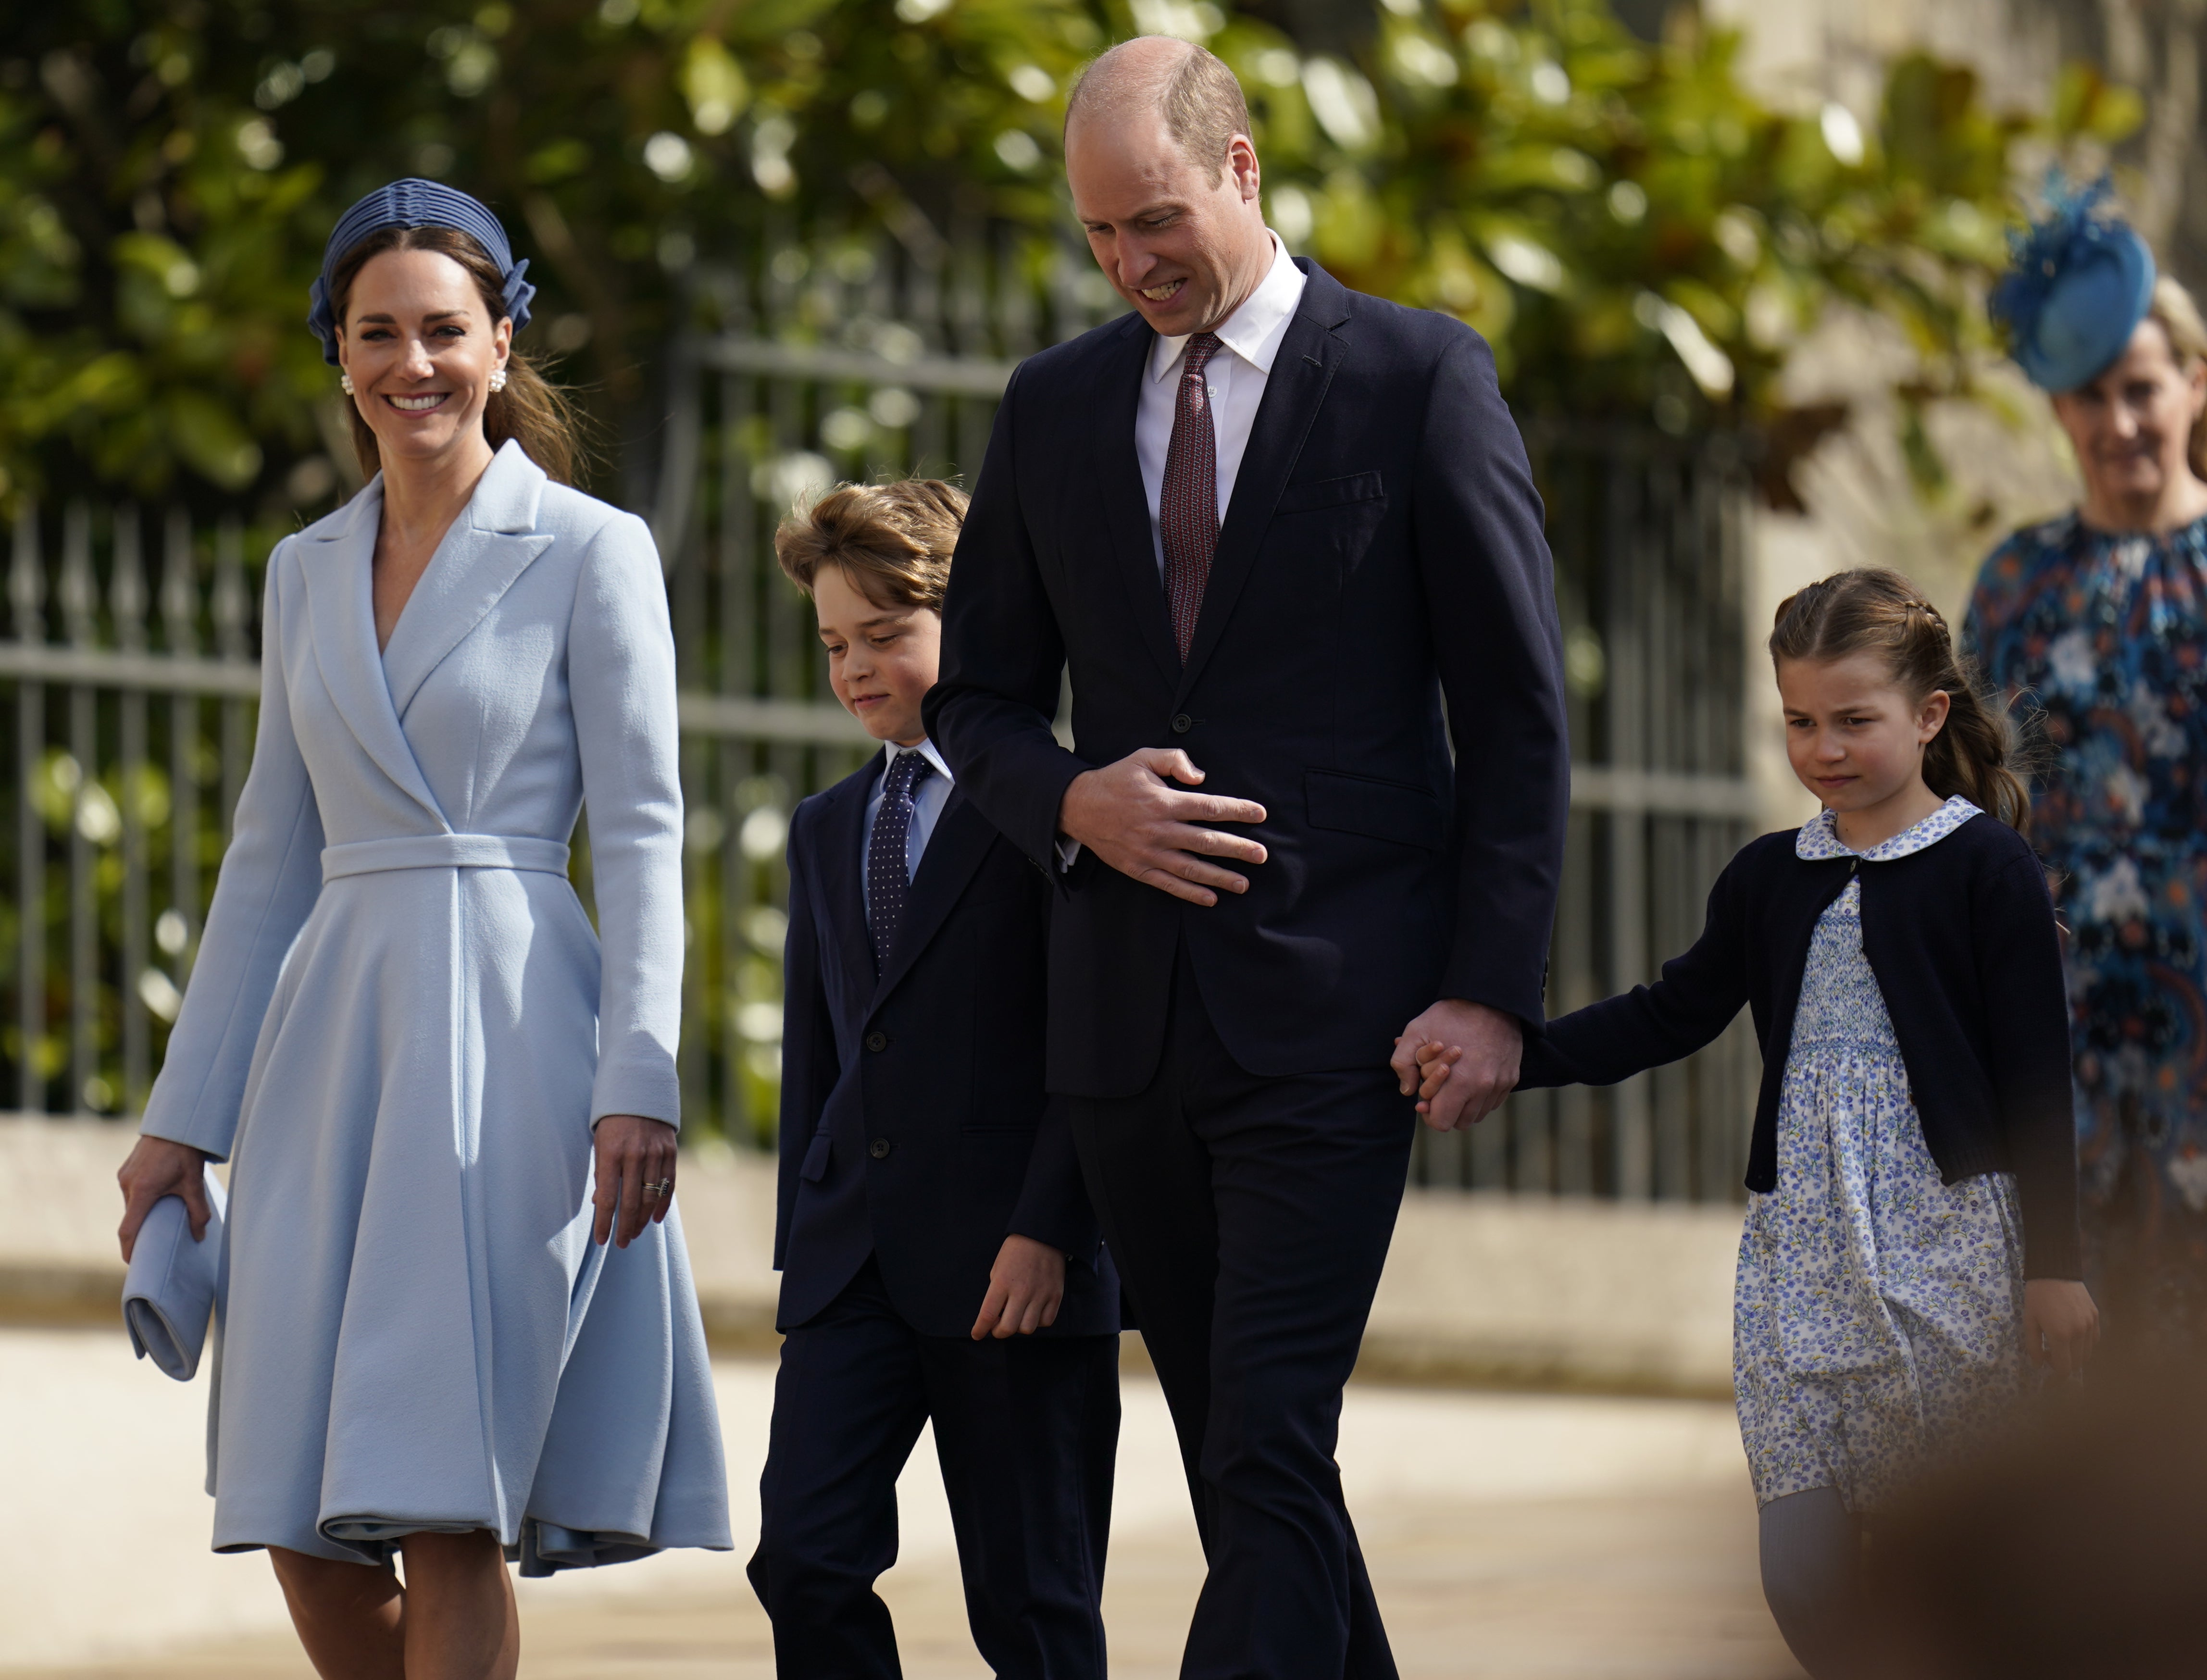 The Duke of Cambridge held his daughter’s hand as they headed into the chapel on Sunday morning (Andrew Matthews/PA)